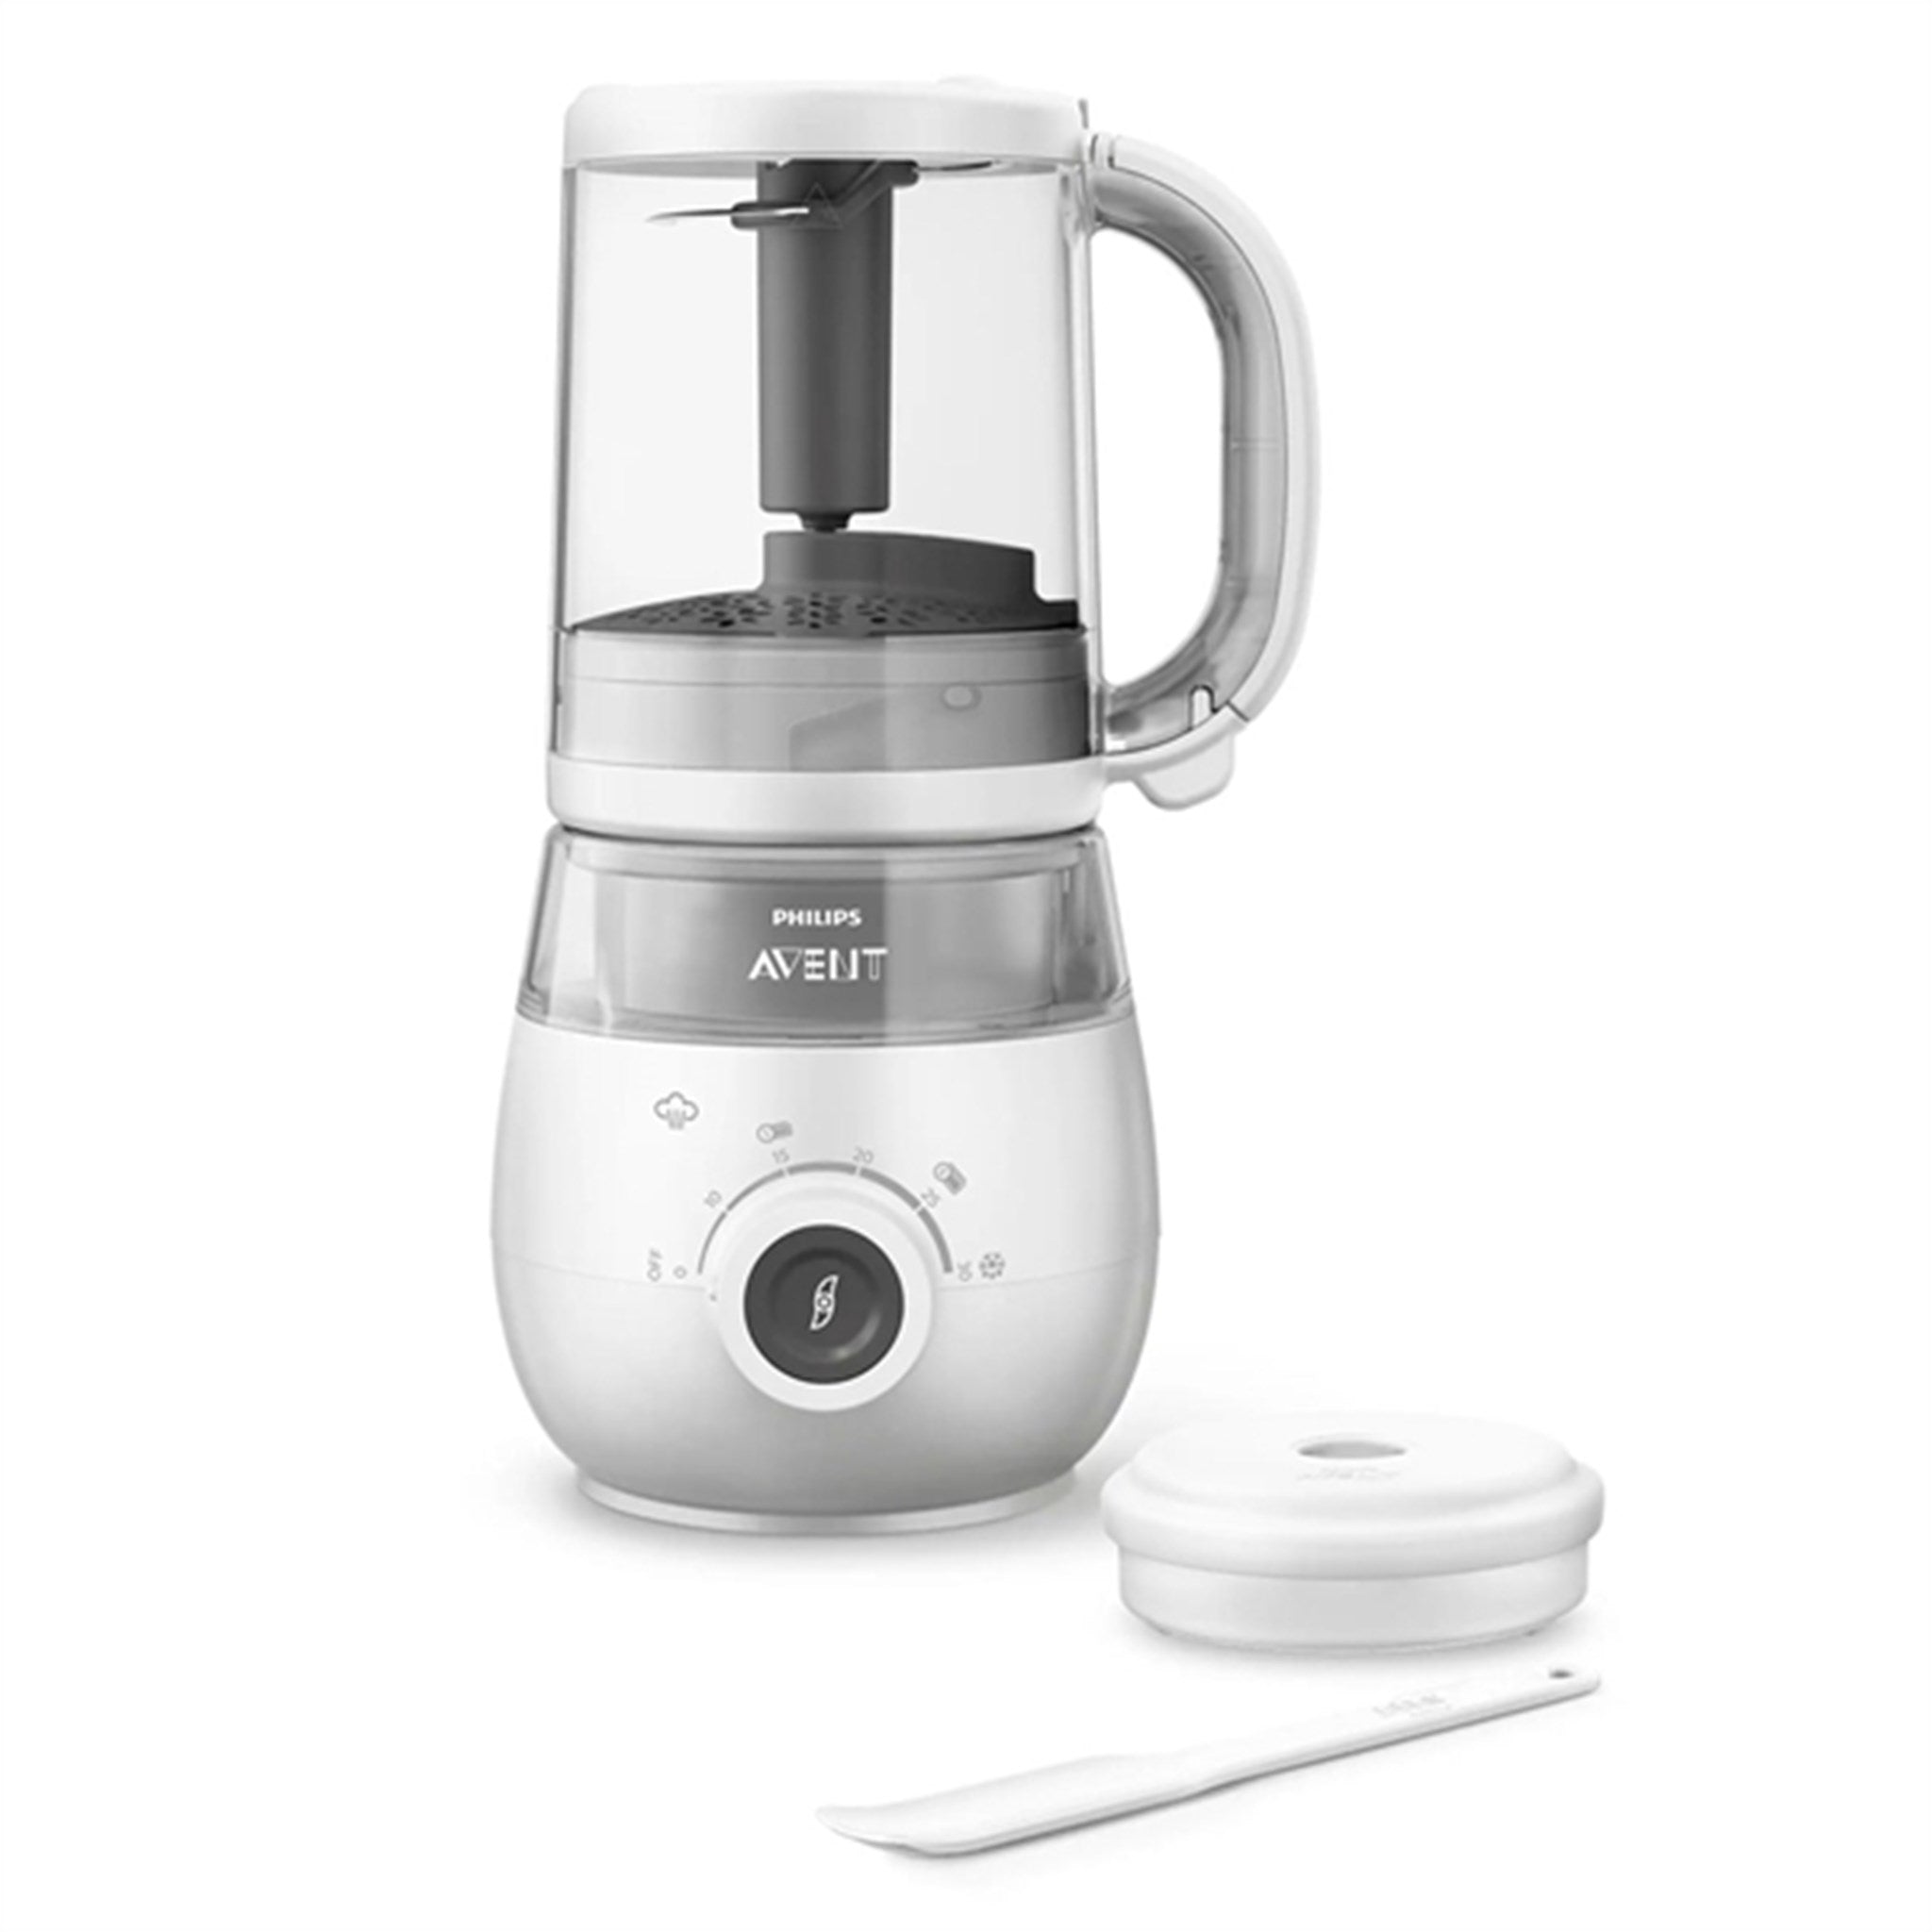 Philips Avent 4-in-1 Baby Food Processor For Healthy Food